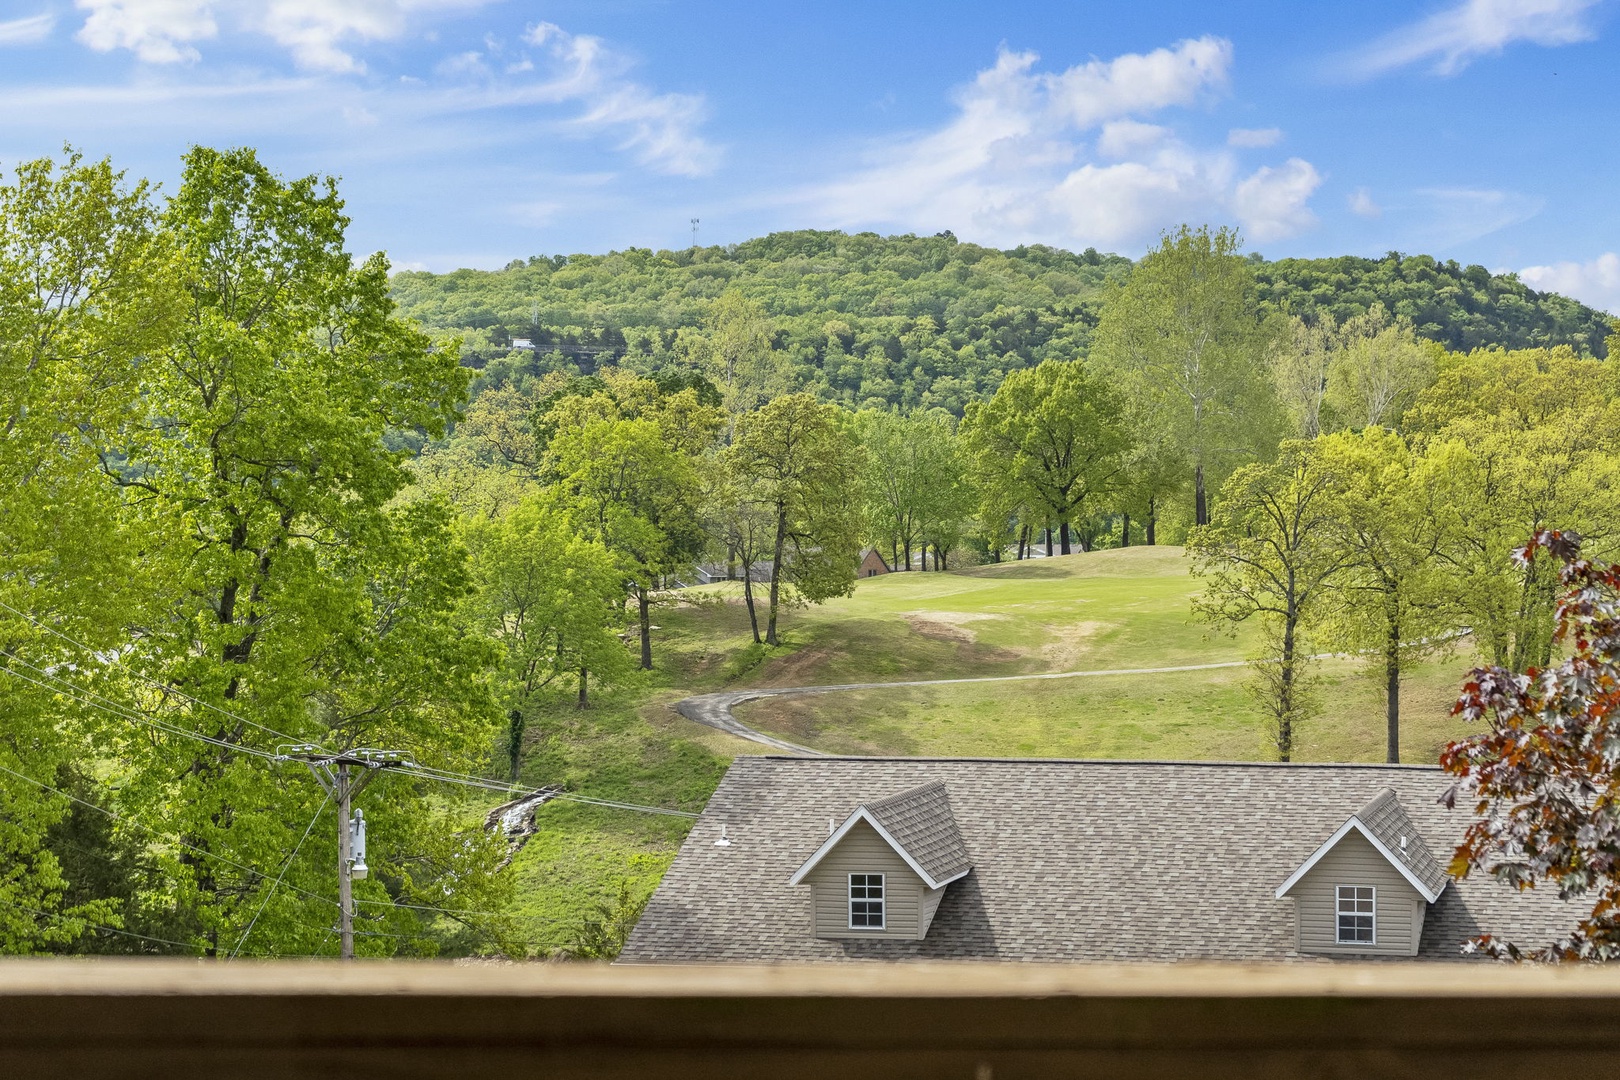 Enjoy your morning coffee with stunning nature views from your back deck